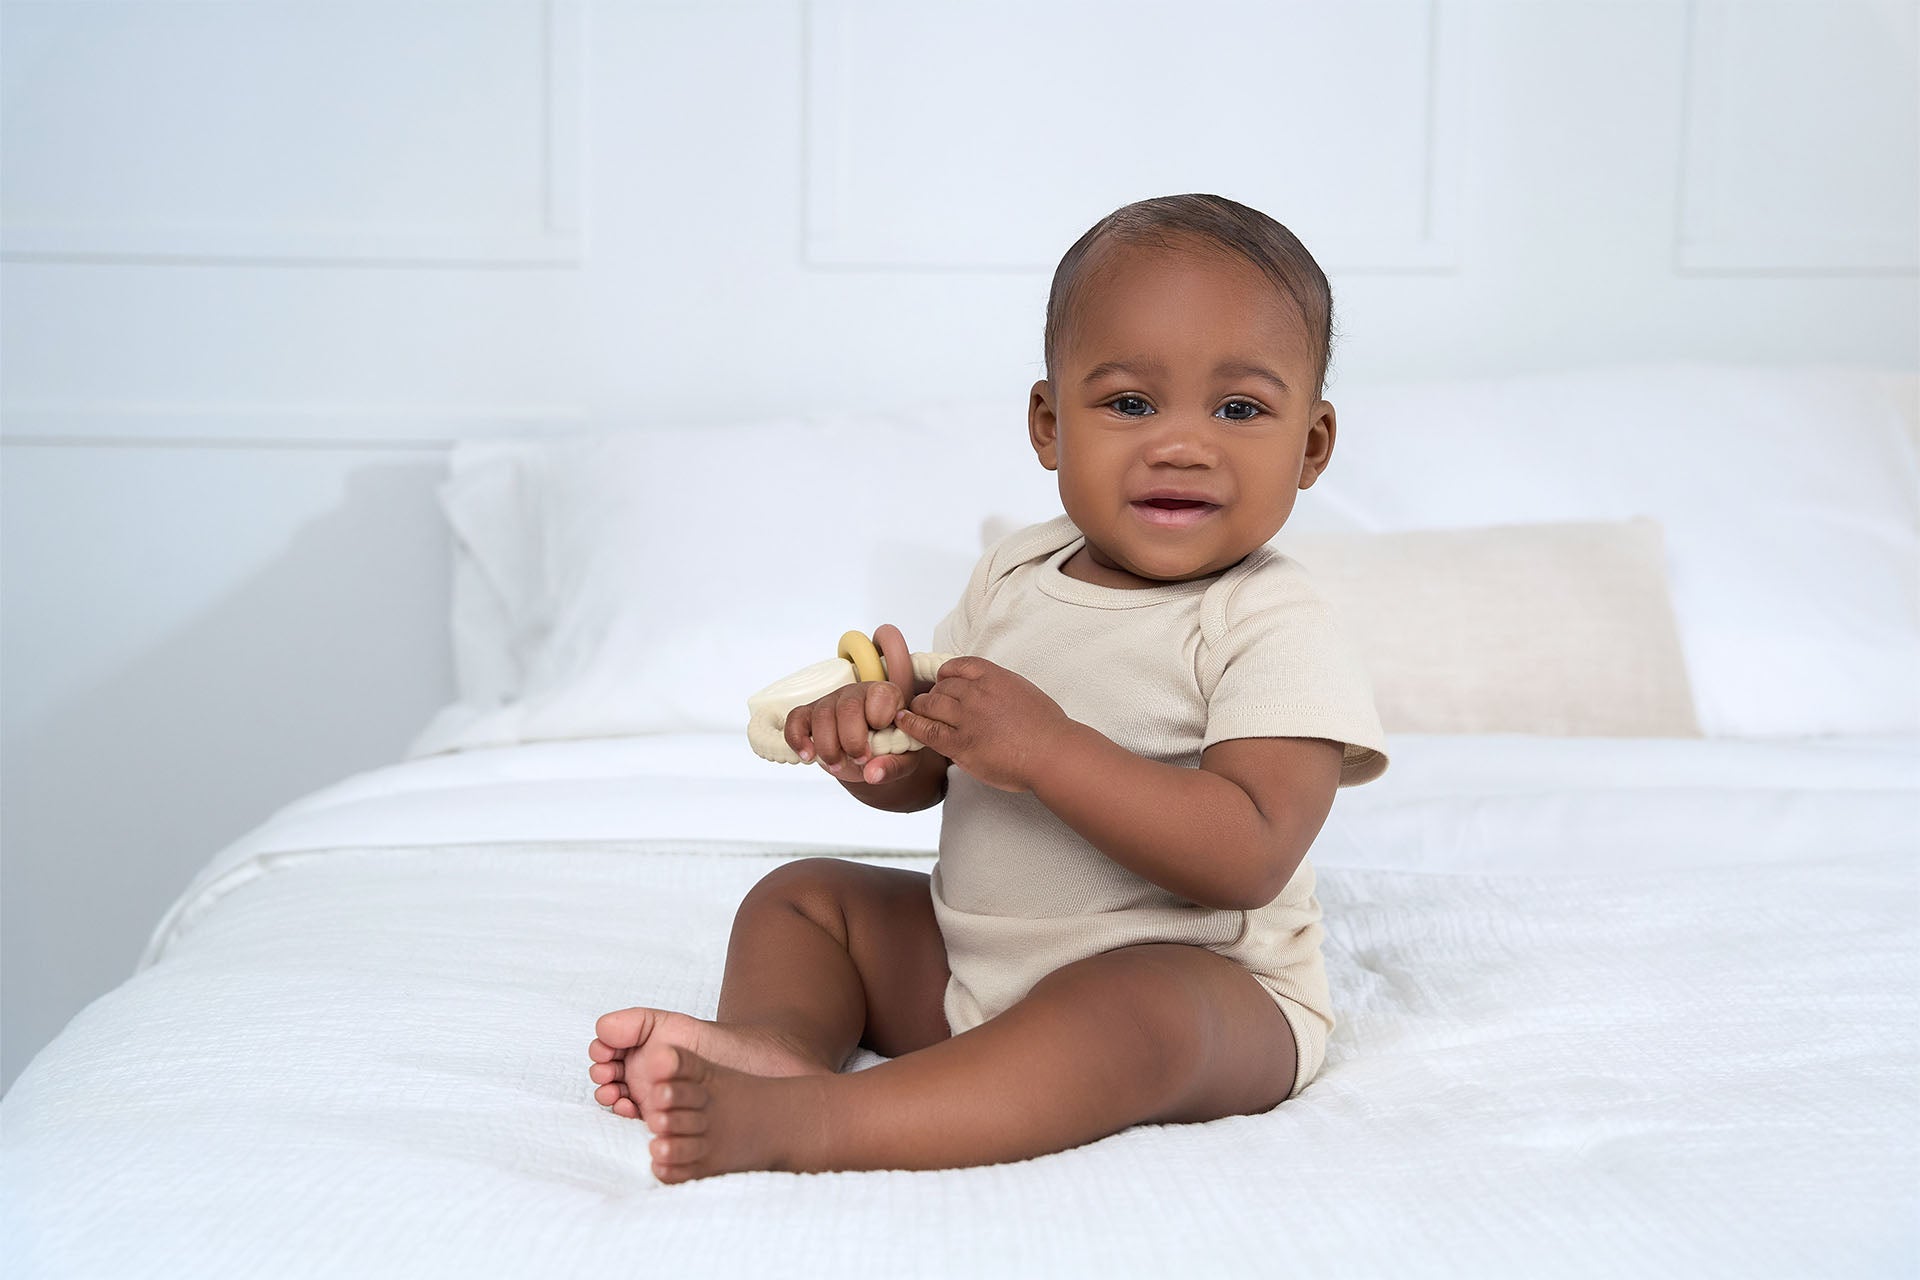 Baby sitting on a white bed, holding a toy, and smiling at the camera in a beige onesie bodysuit.